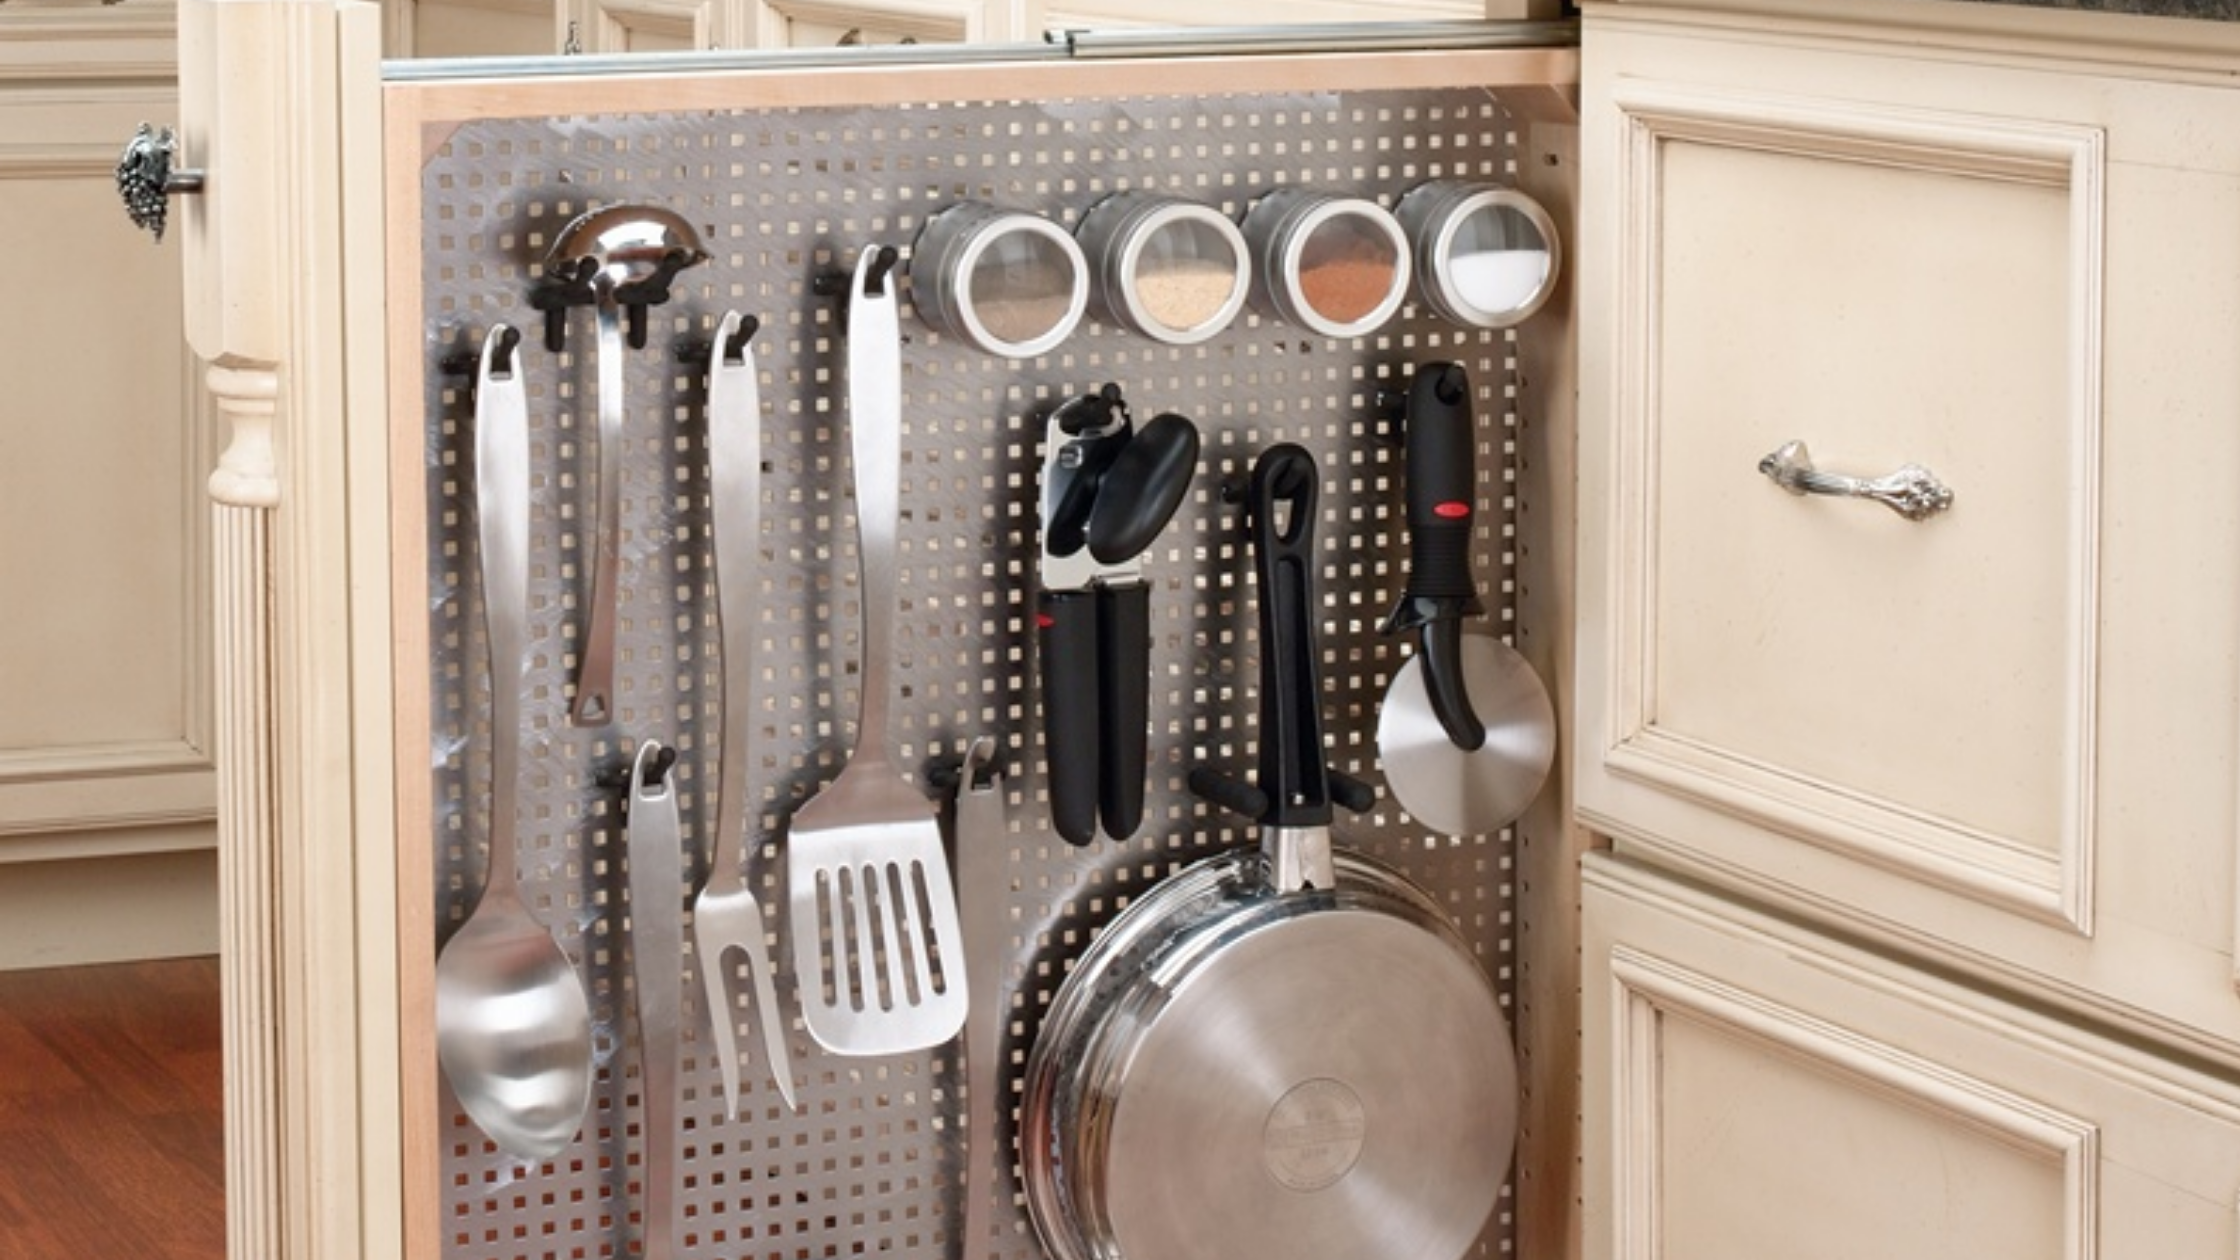 Make your life easier and less stressful by organizing your kitchen